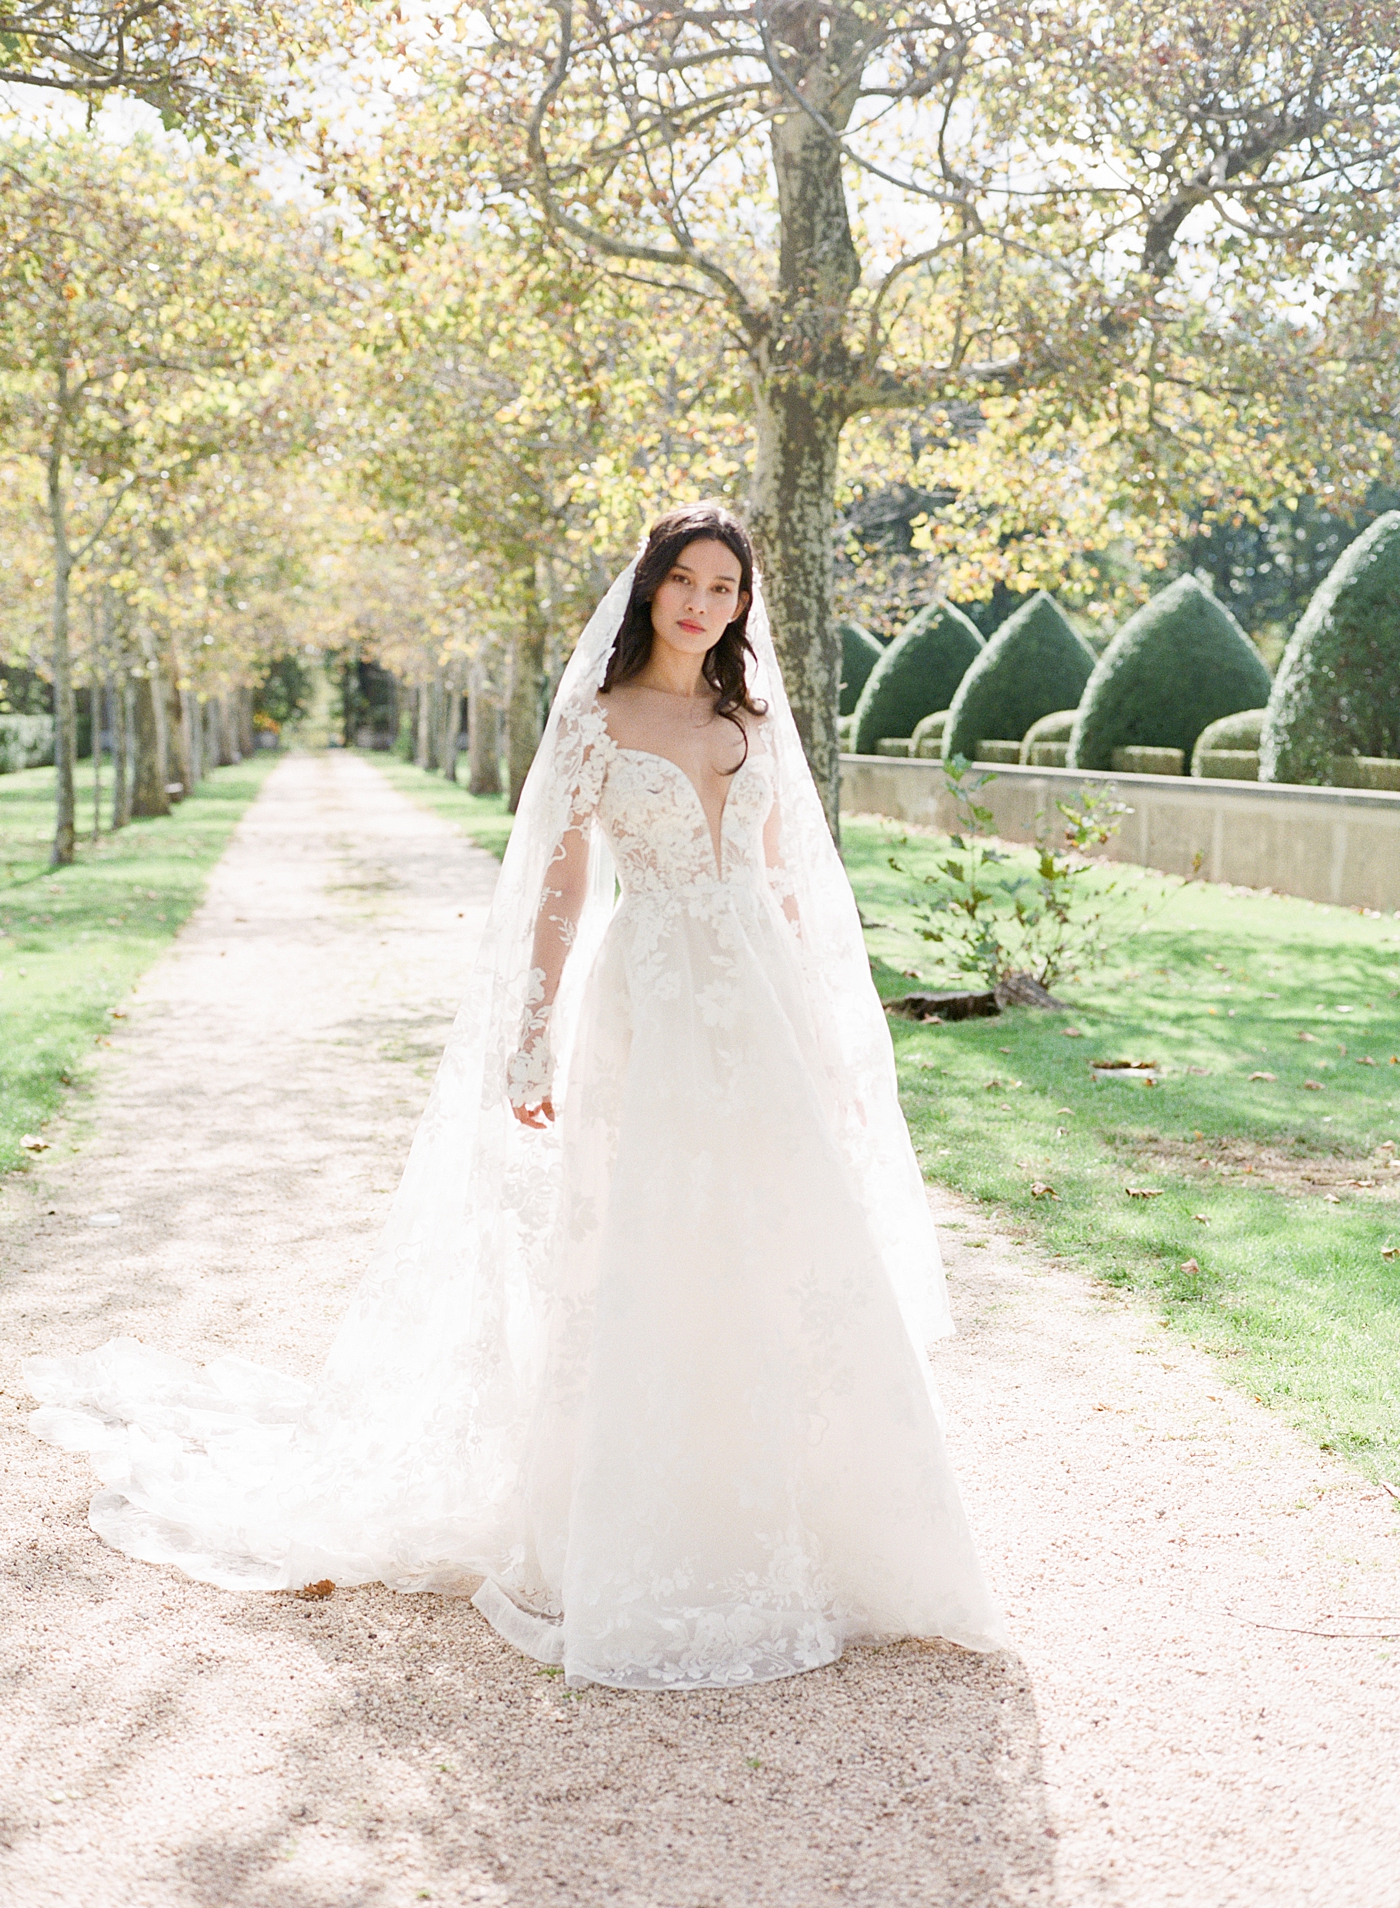 Bridal portrait at the end of a tree-lined driveway during Oheka castle wedding | Image by Hope Helmuth Photography